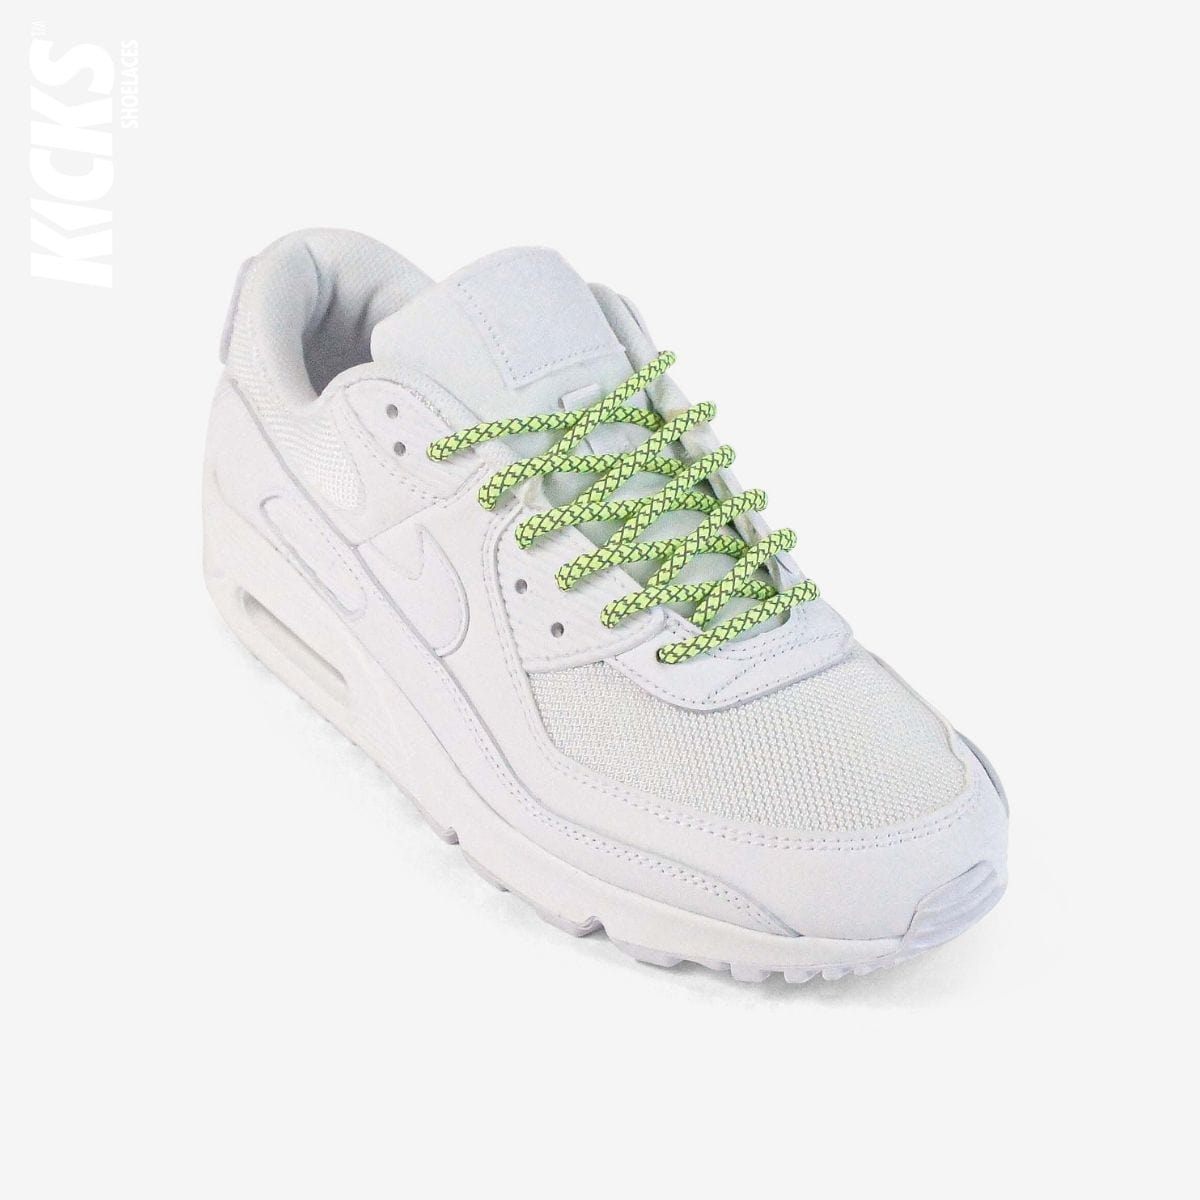 rope-laces-on-white-sneakers-with-kids-green-shoelaces